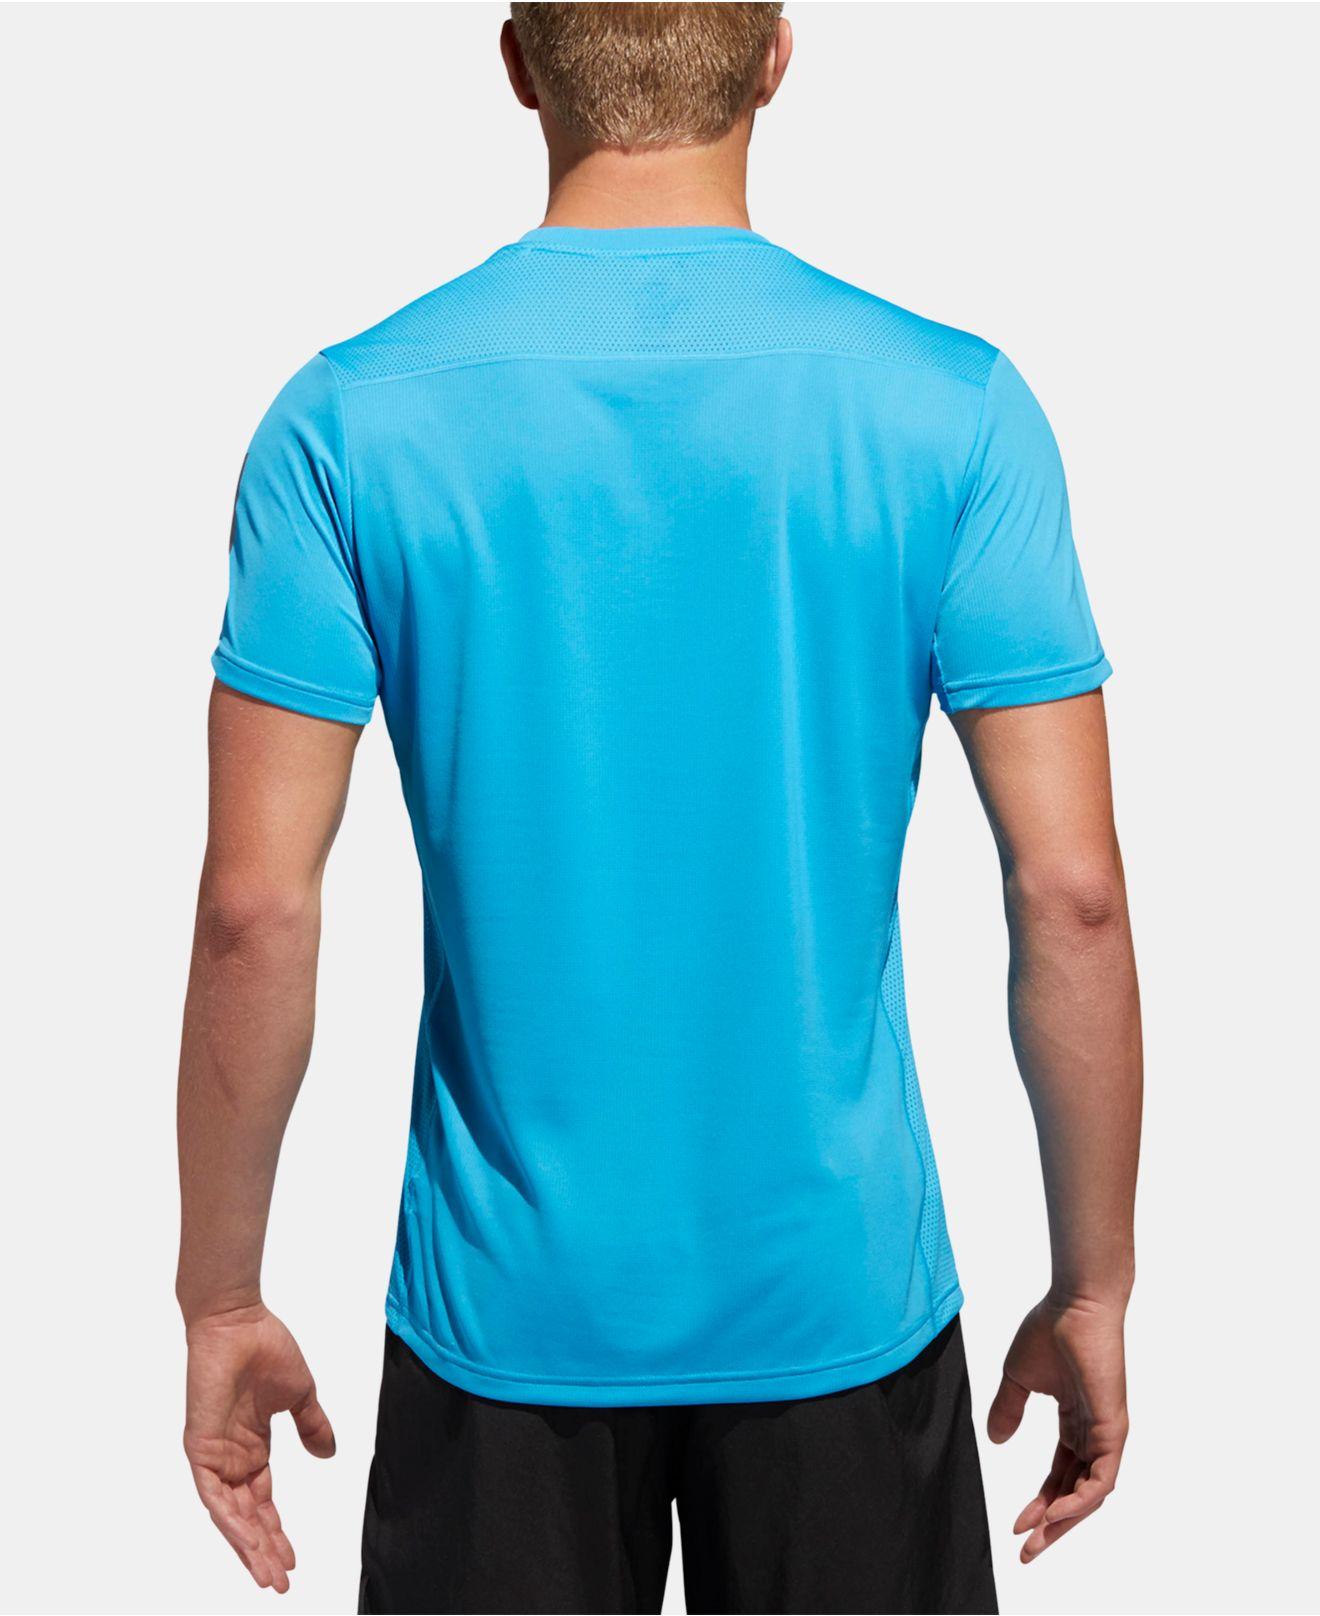 adidas Synthetic Climacool® T-shirt in Blue for Men - Lyst